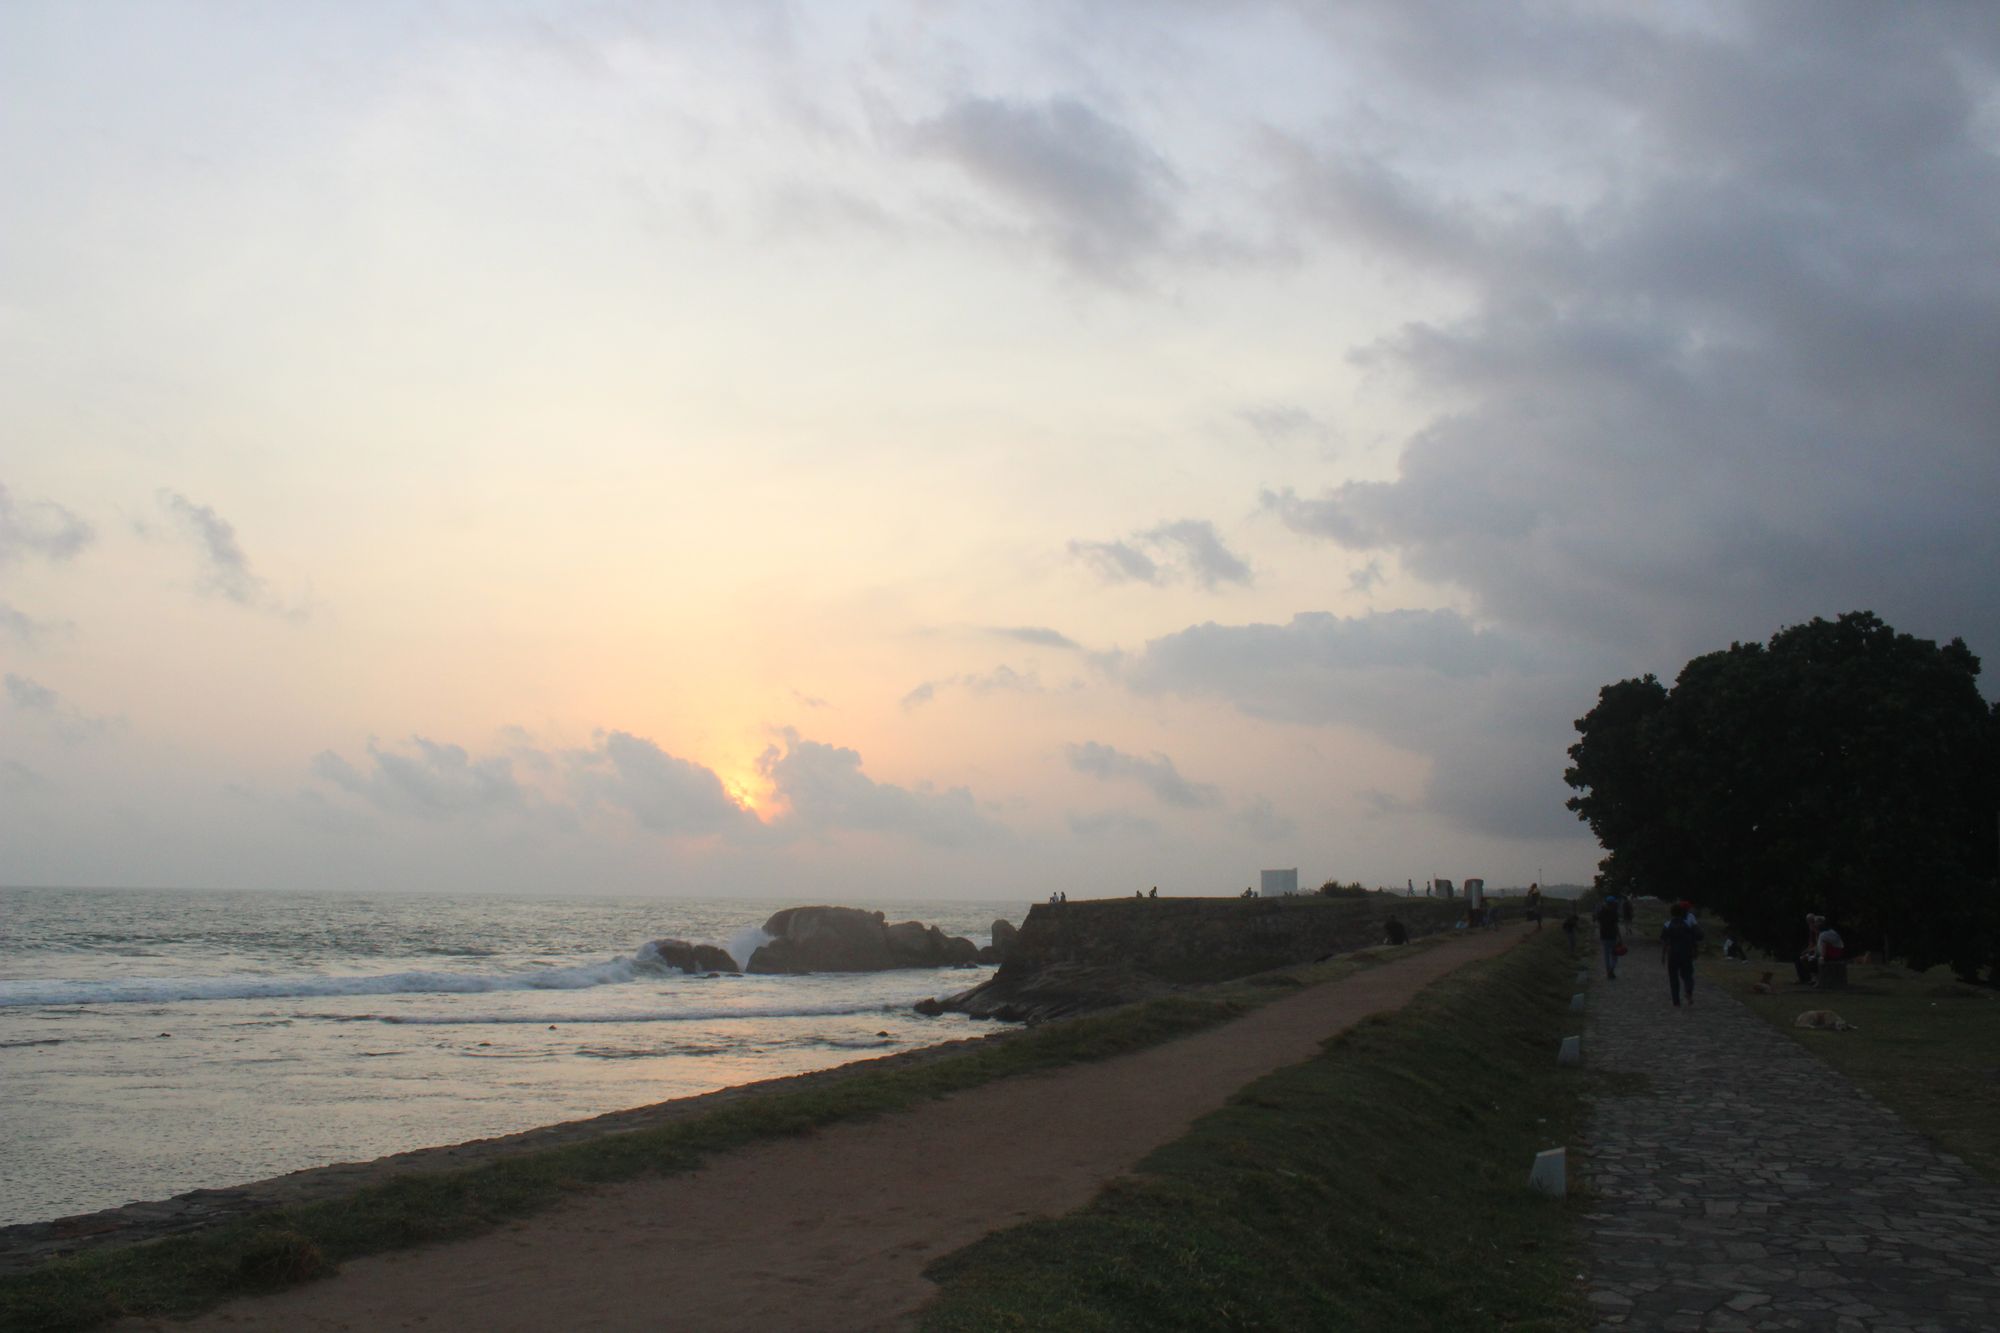 Ramparts of the Galle Dutch Fort with people walking around during the evening.